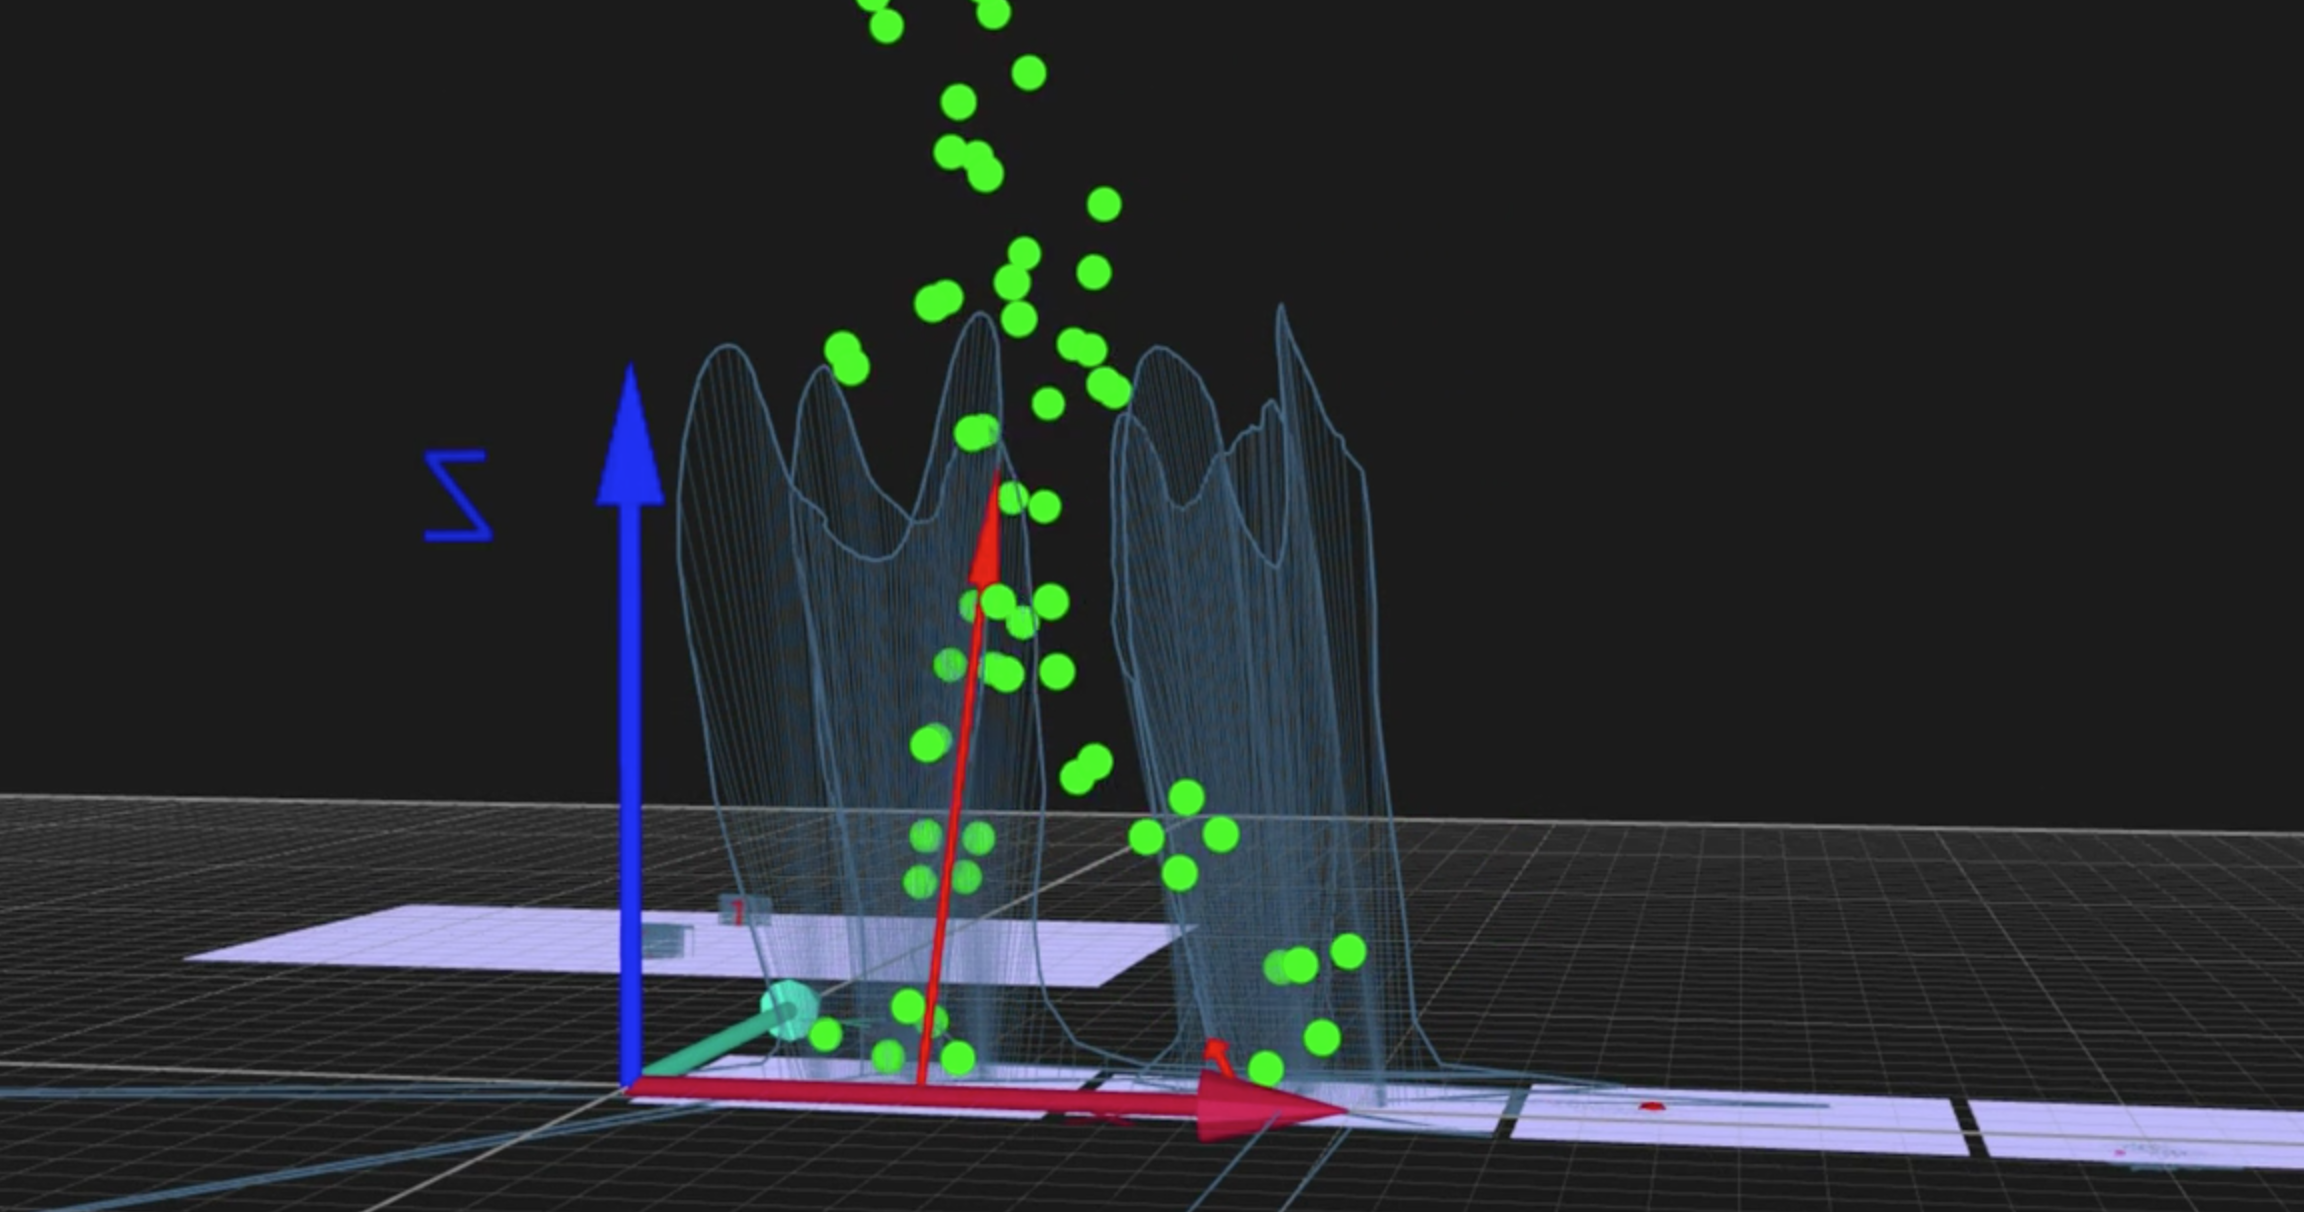 Qualysis mocap data with green dots showing person walking over force plates.